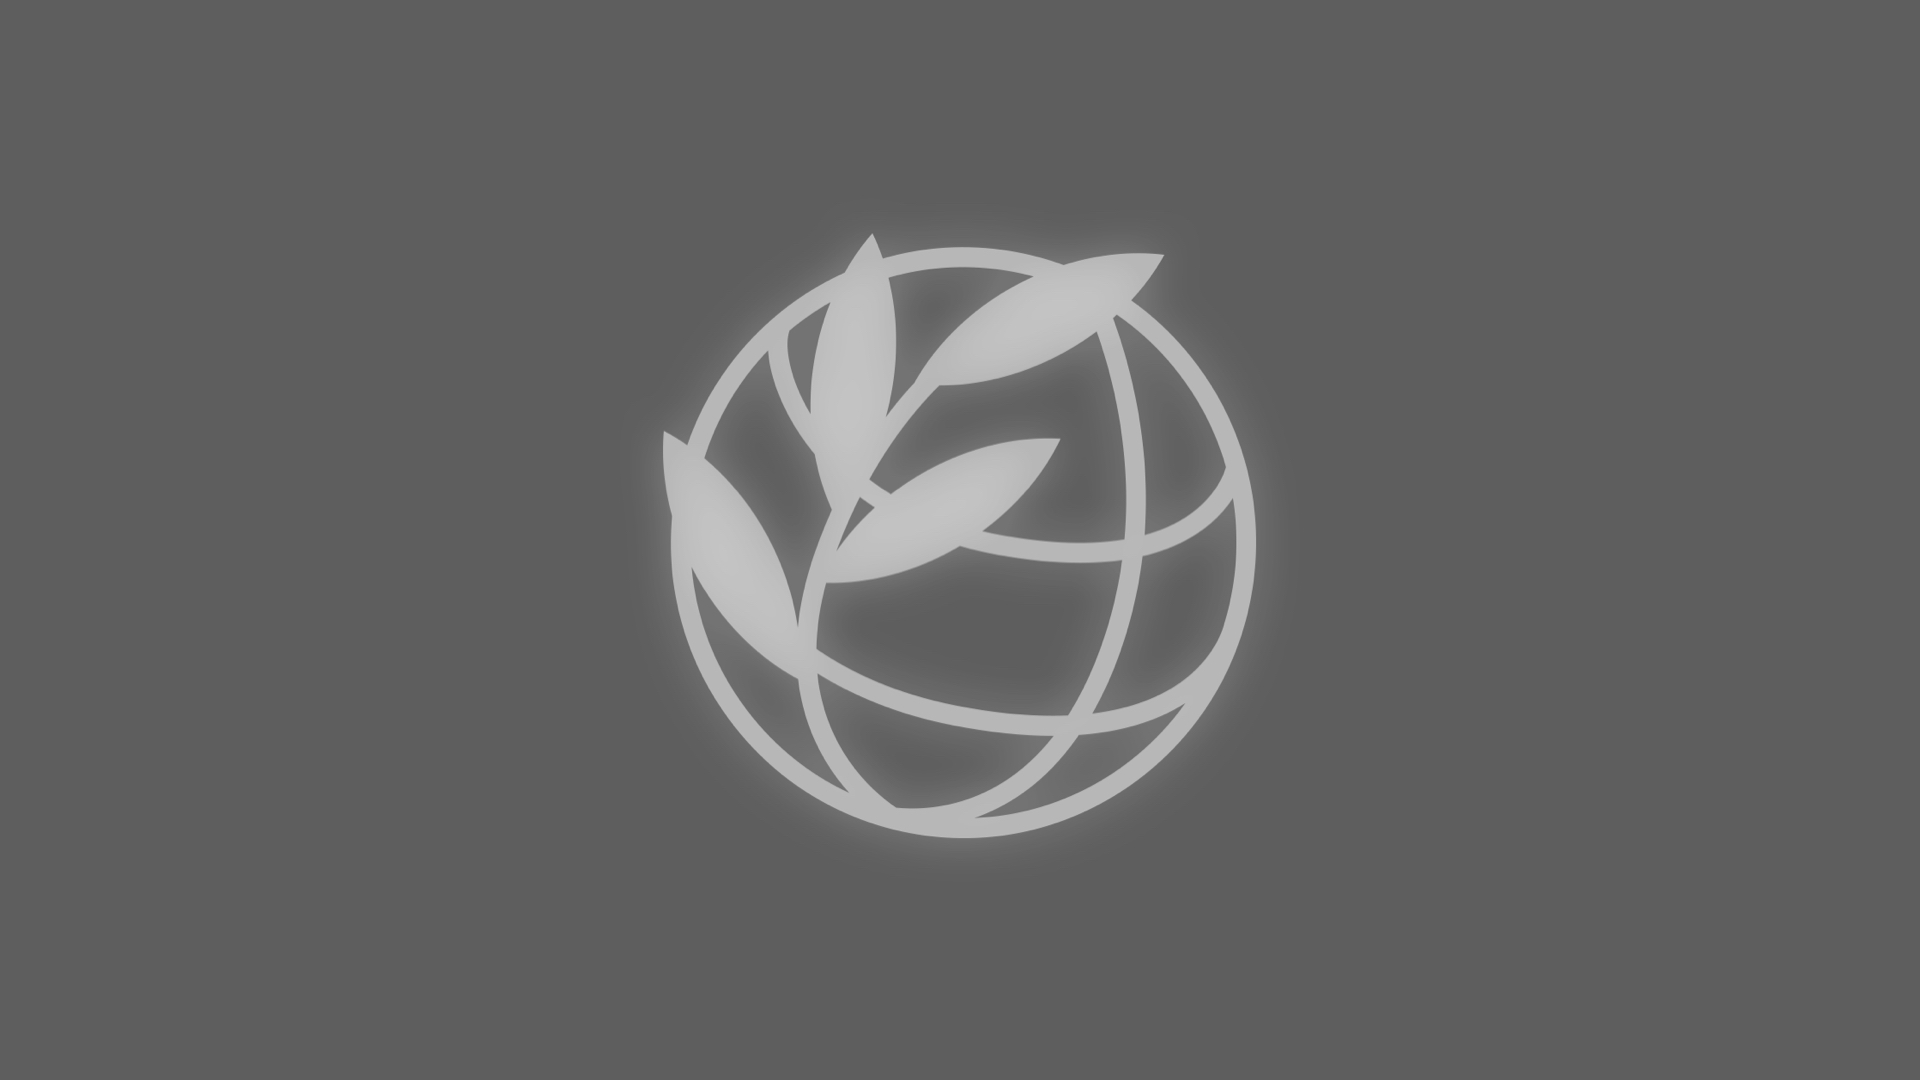 Logo of a globe with a branch representing the Global Internet Forum to Counter Terrorism (GIFCT)